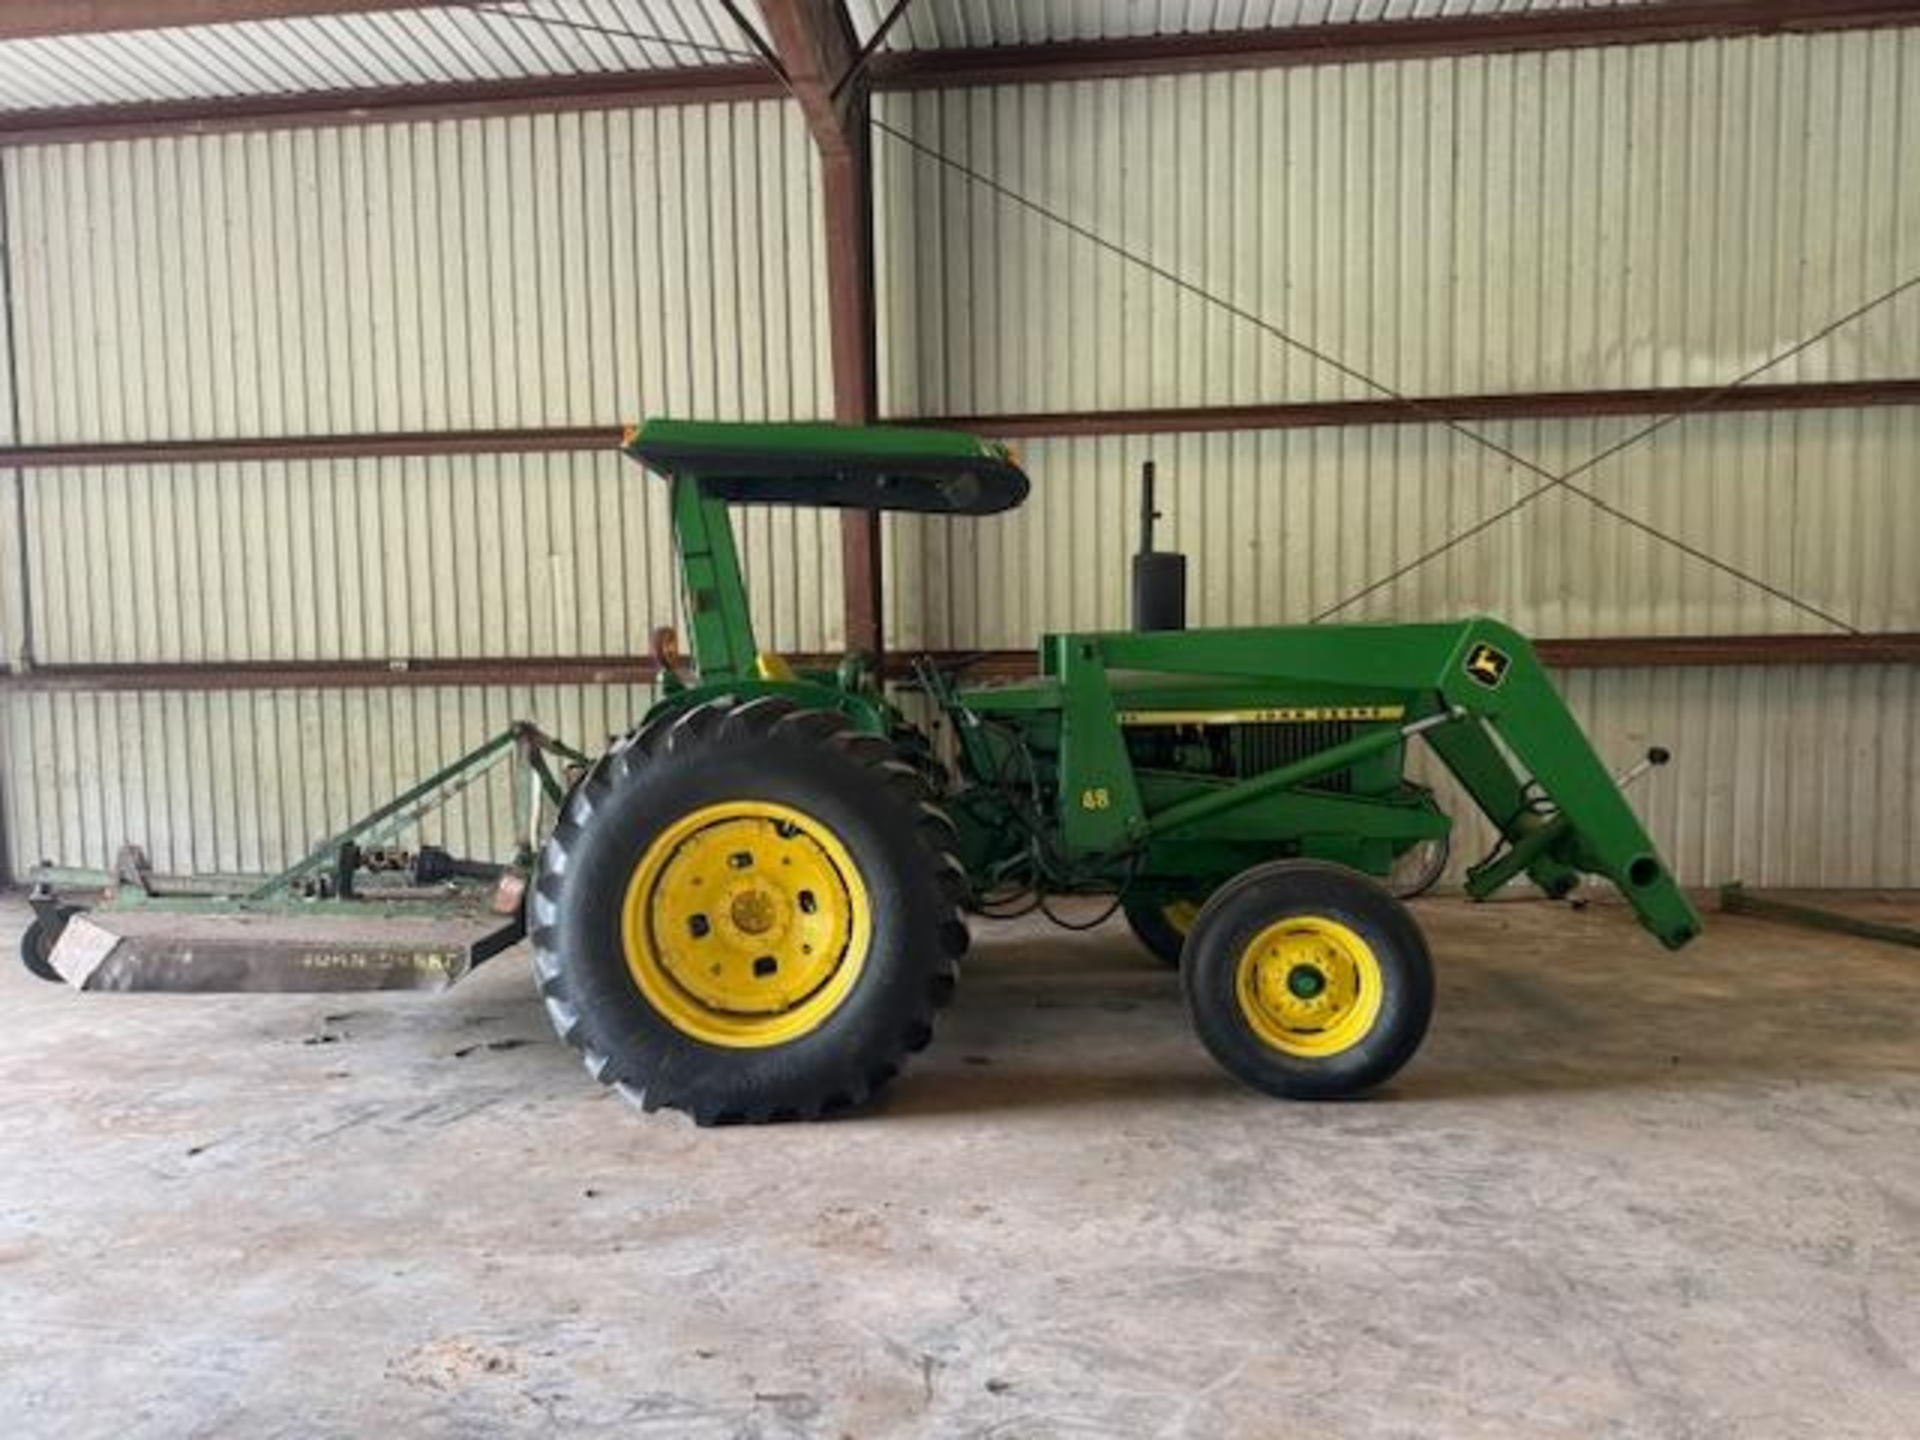 UTILITY TRACTOR, JOHN DEERE MDL. 1520, gasoline engine, Type E0048 front end loader attachment, ROPS - Image 2 of 3